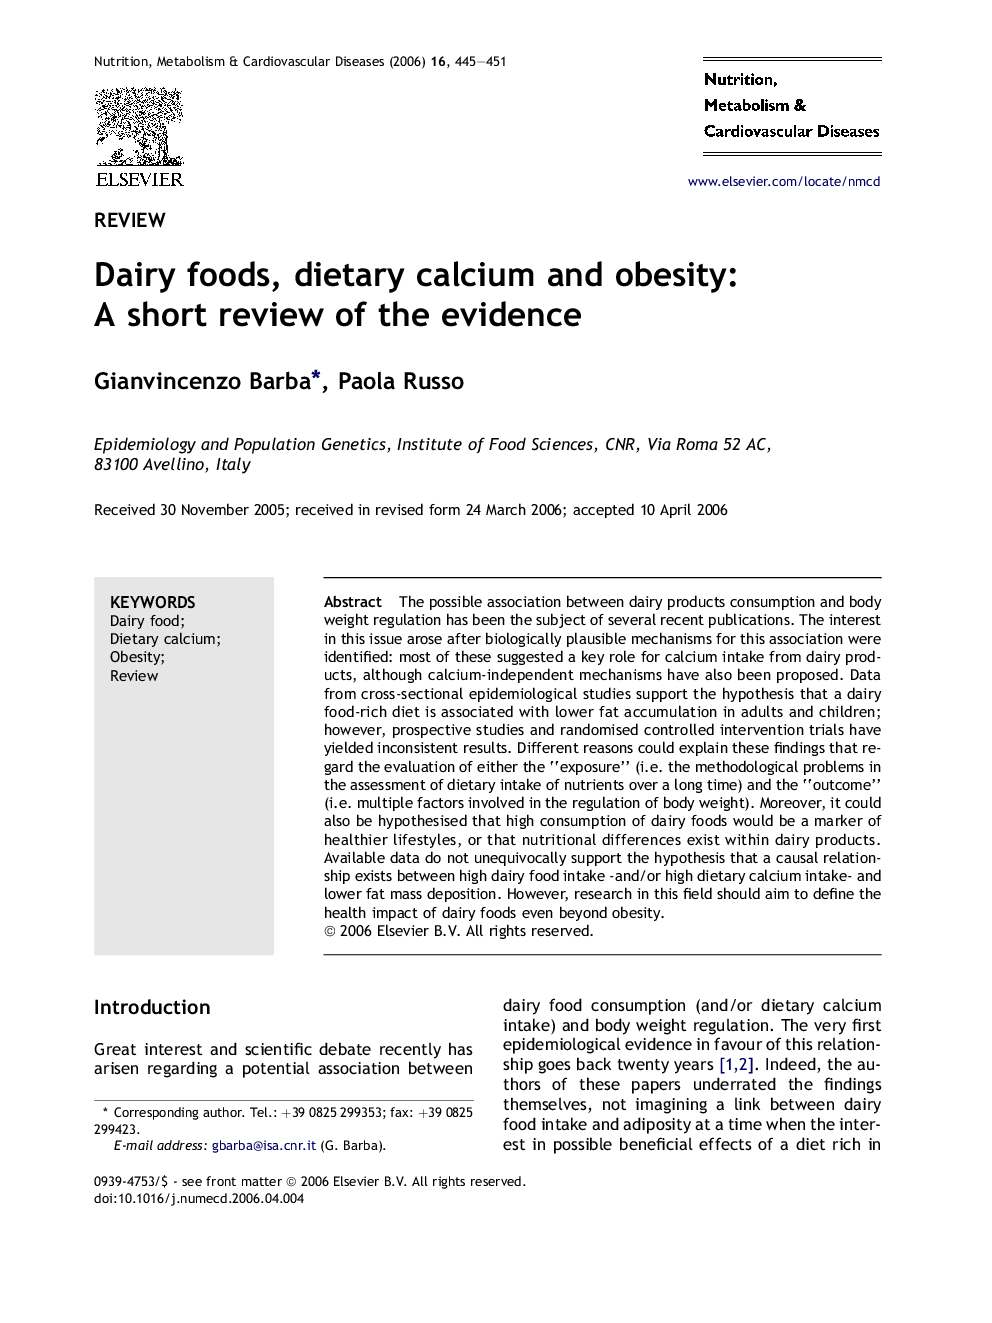 Dairy foods, dietary calcium and obesity: A short review of the evidence